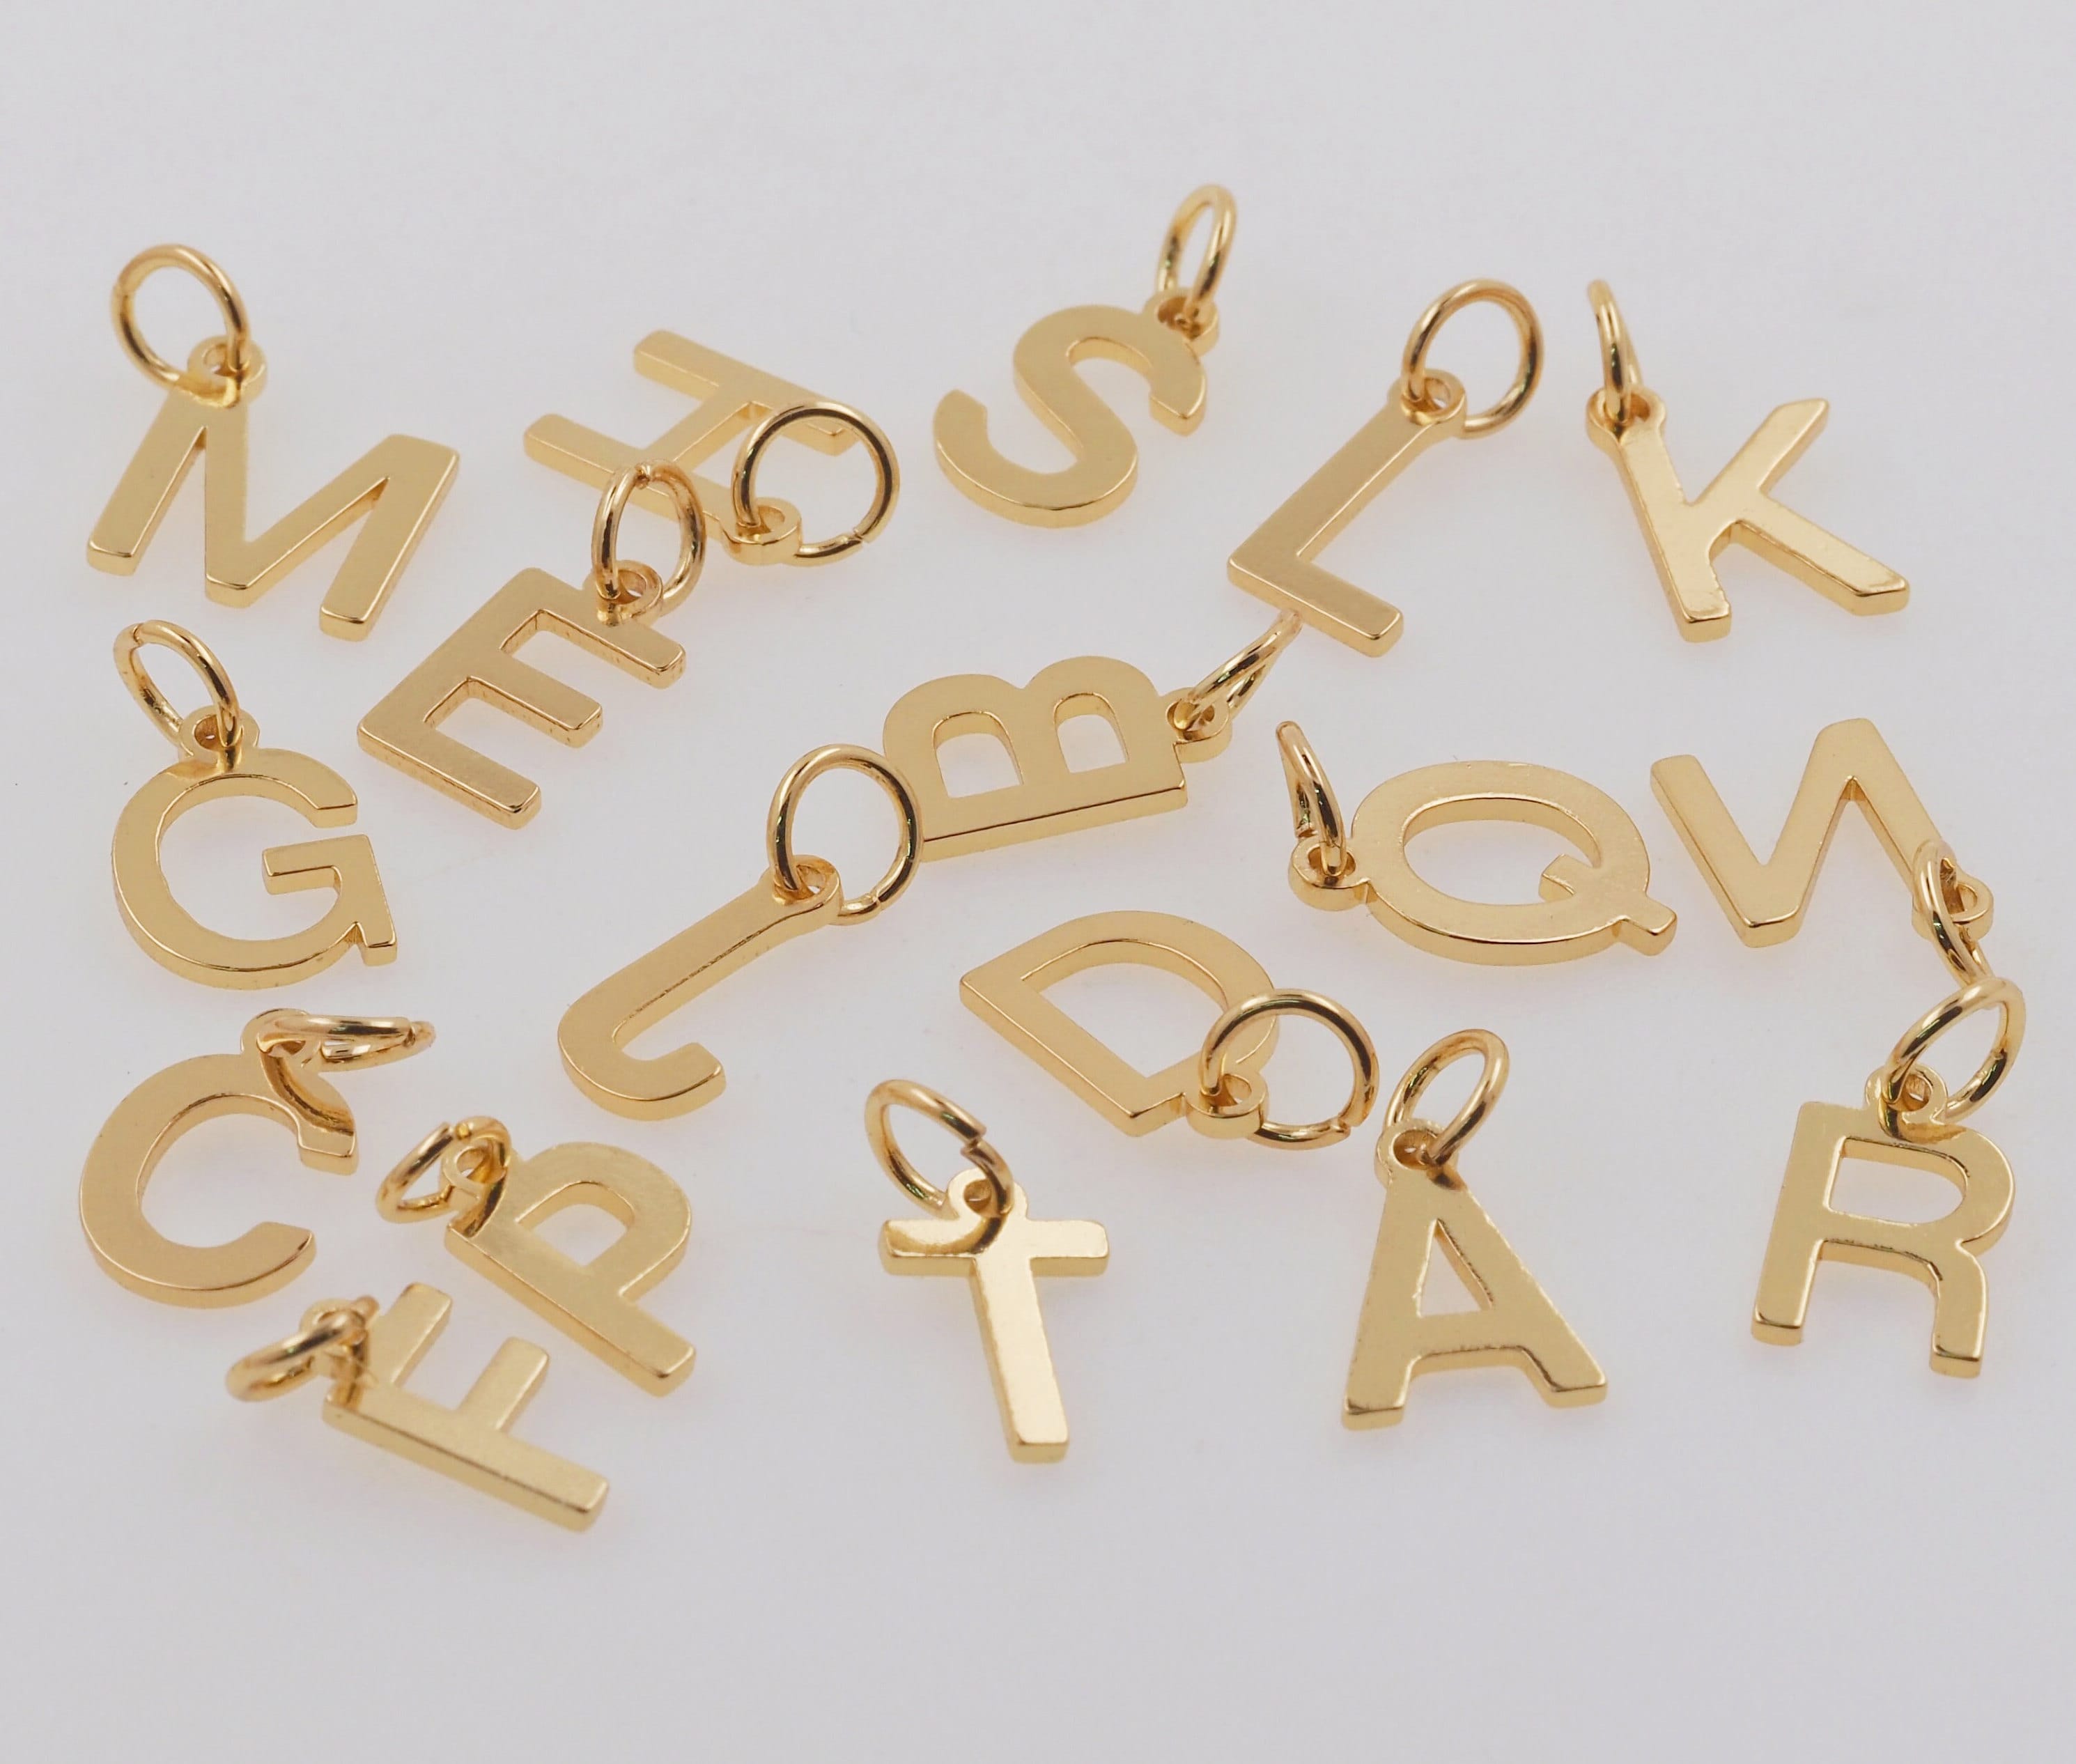 20pcs New Gold-Plate Letter Charm Initial Charms Alphabet Beads Pendants  Assorted for Bracelet Necklace Making